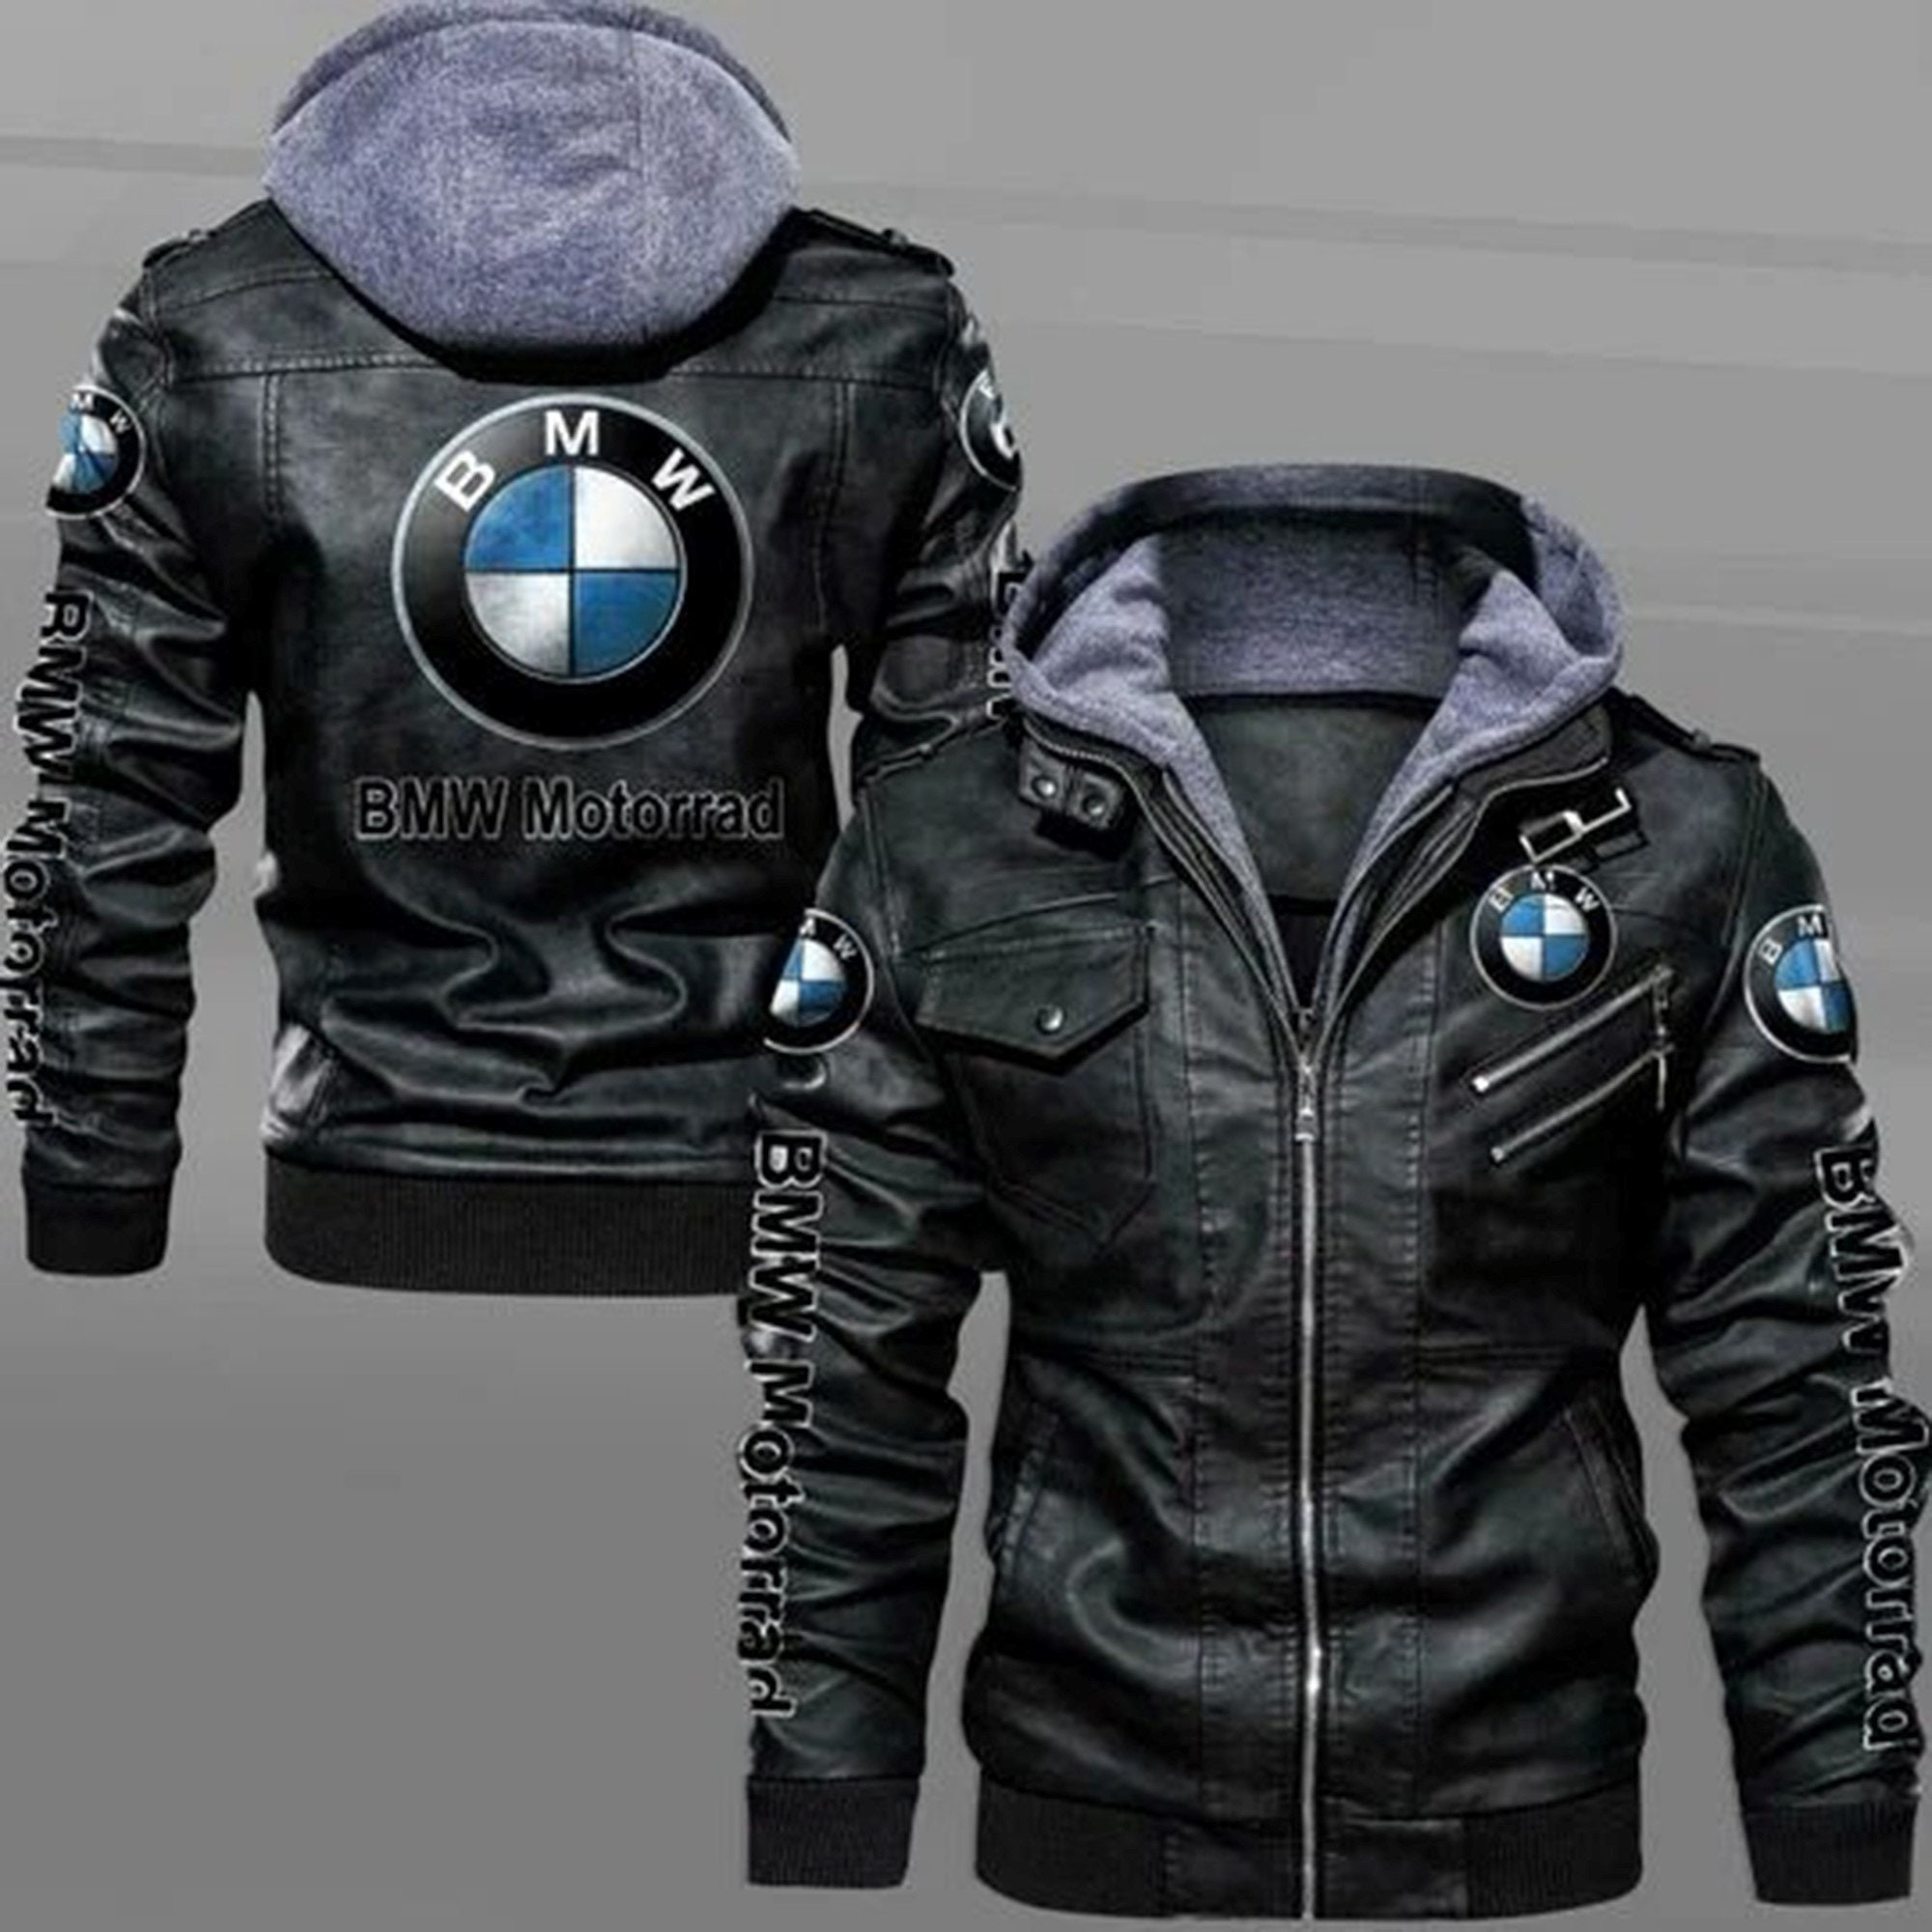 These Amazing Leather Jacket will add to the appeal of your outfit 441